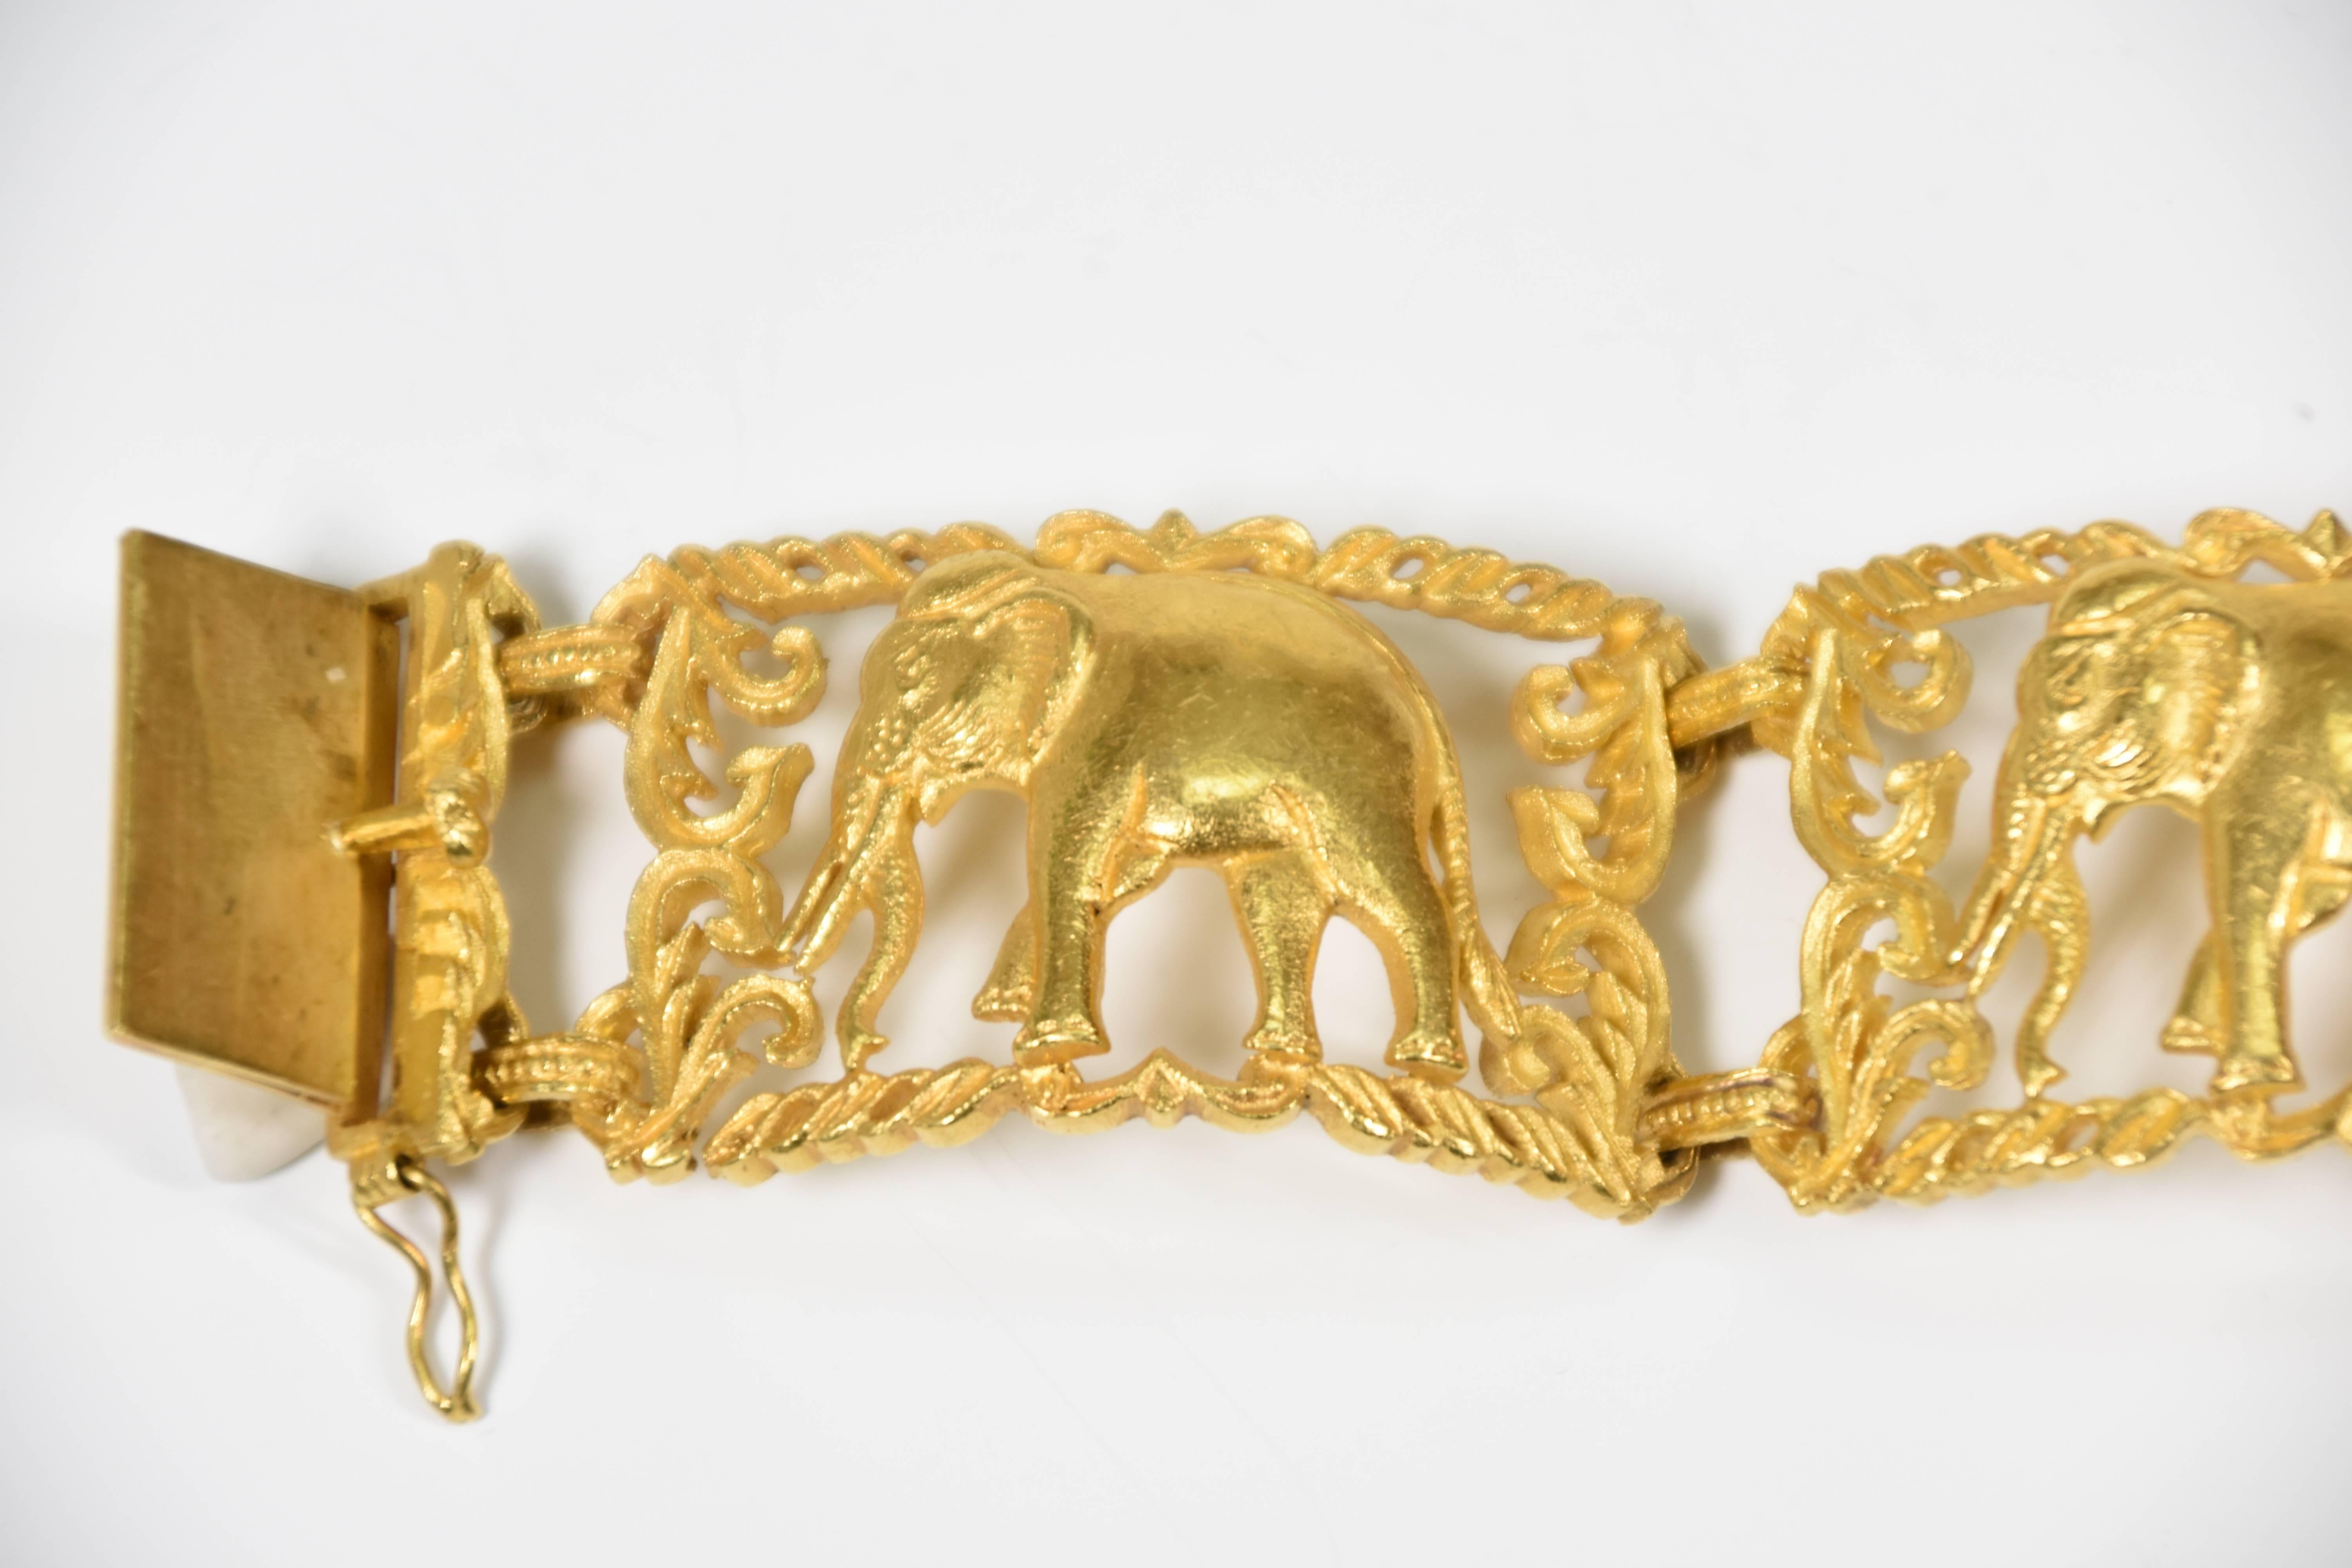 In the style of Cartier 23ct yellow gold cuff-style bracelet  featuring three individually articulated curved panels centred by an elephant motif surrounded by a scrolled and swagged border.  The bracelet measures 16.5cm in length and is fastened